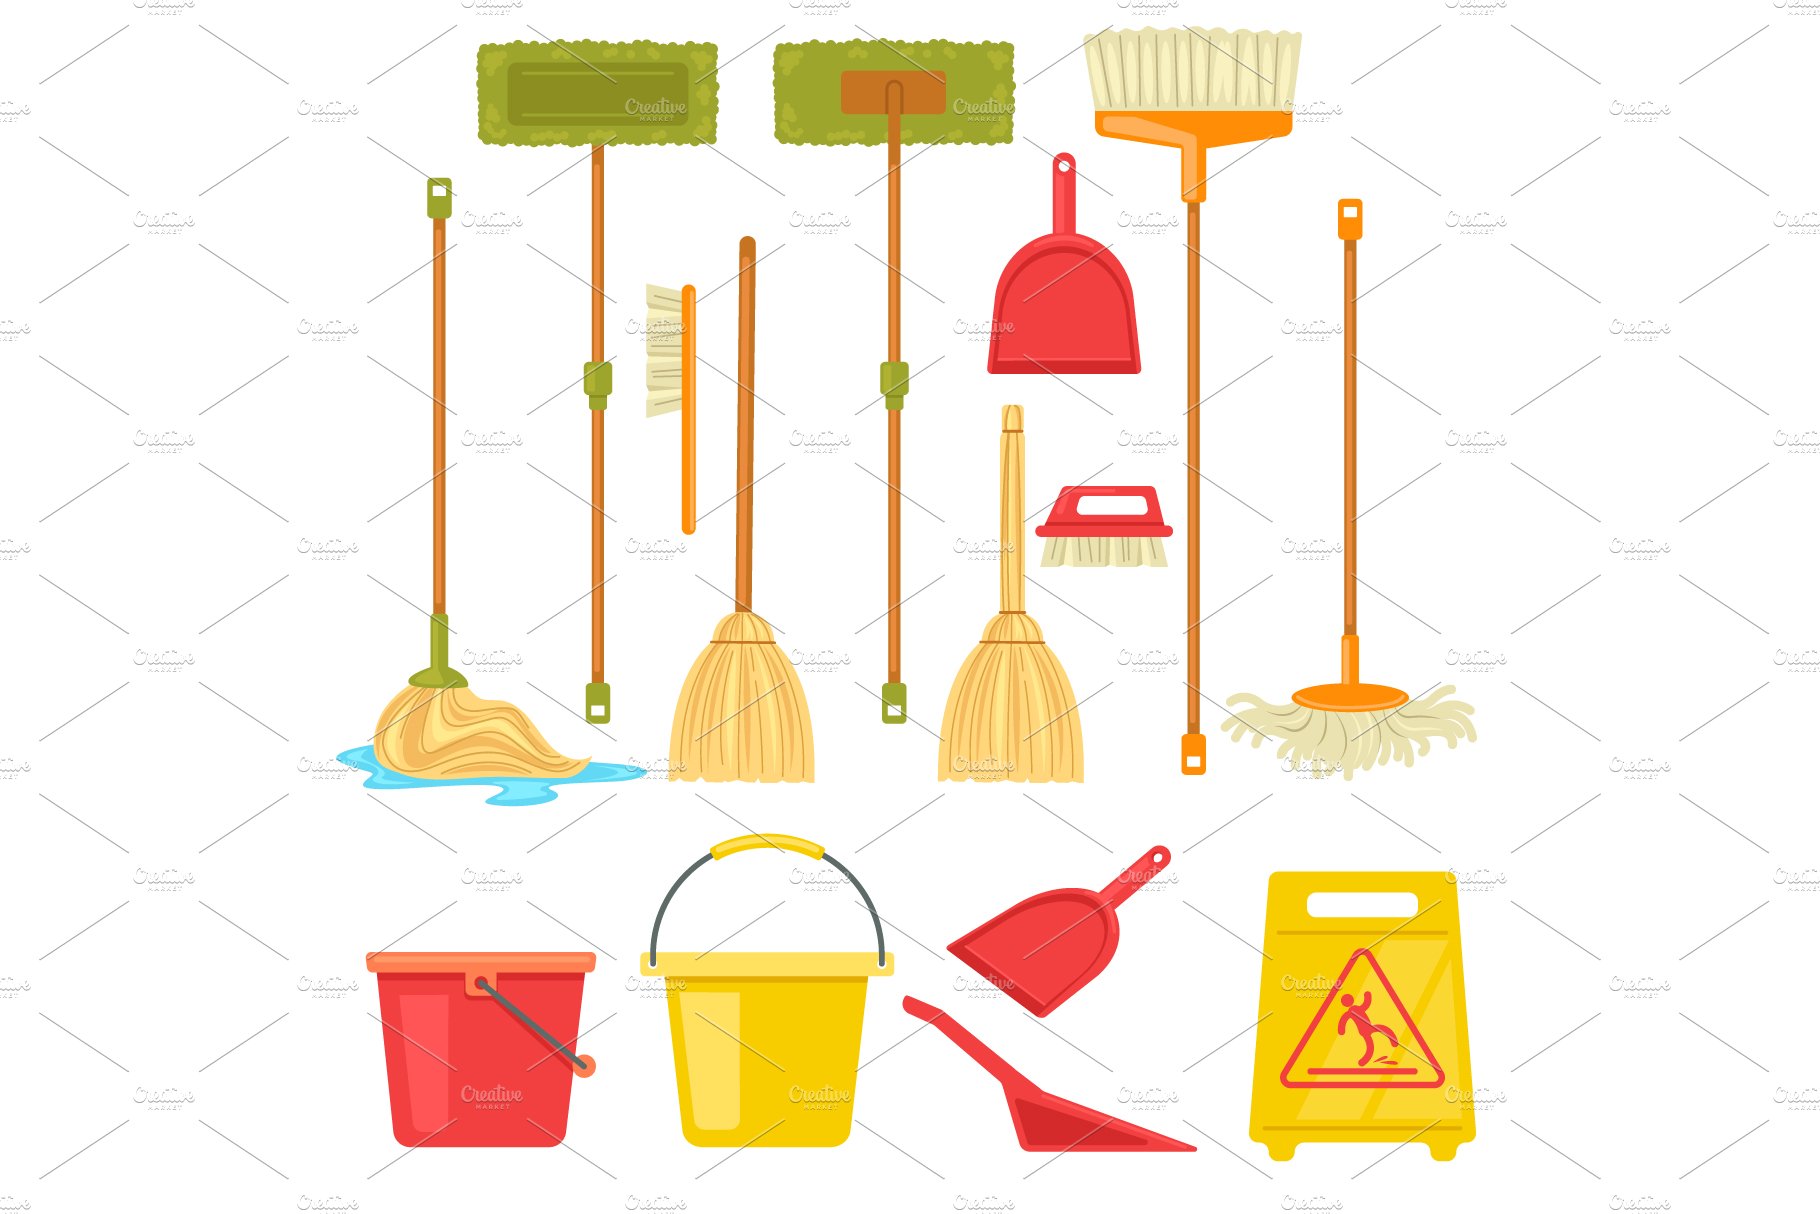 Cleaning tools broom mop supplies cover image.